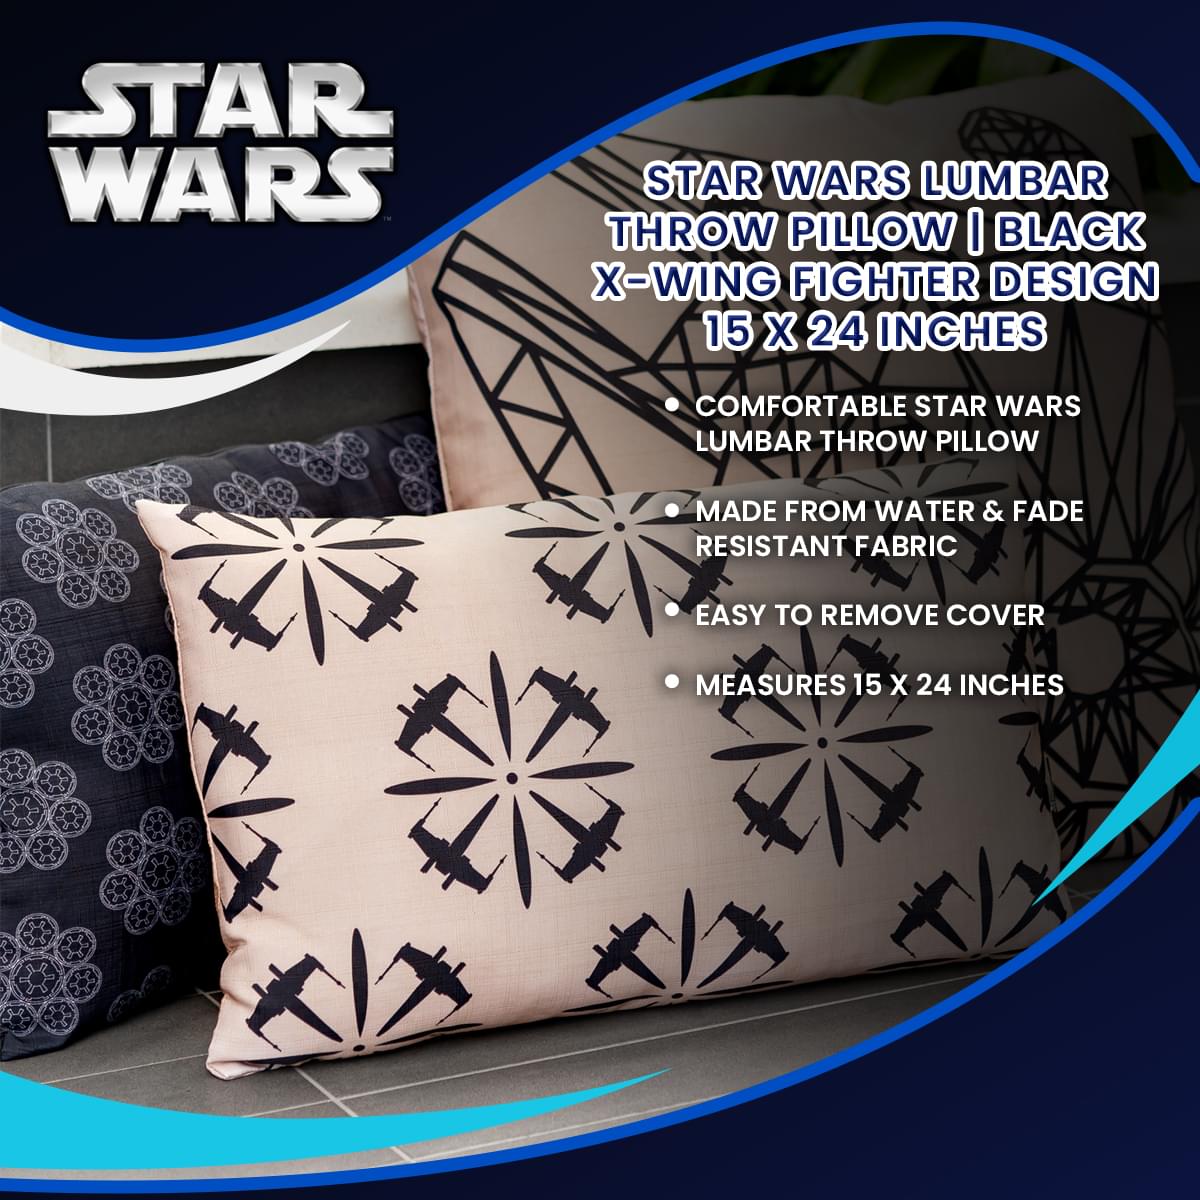 Star Wars Lumbar Throw Pillow | Black X-Wing Fighter Design | 15 x 24 Inches